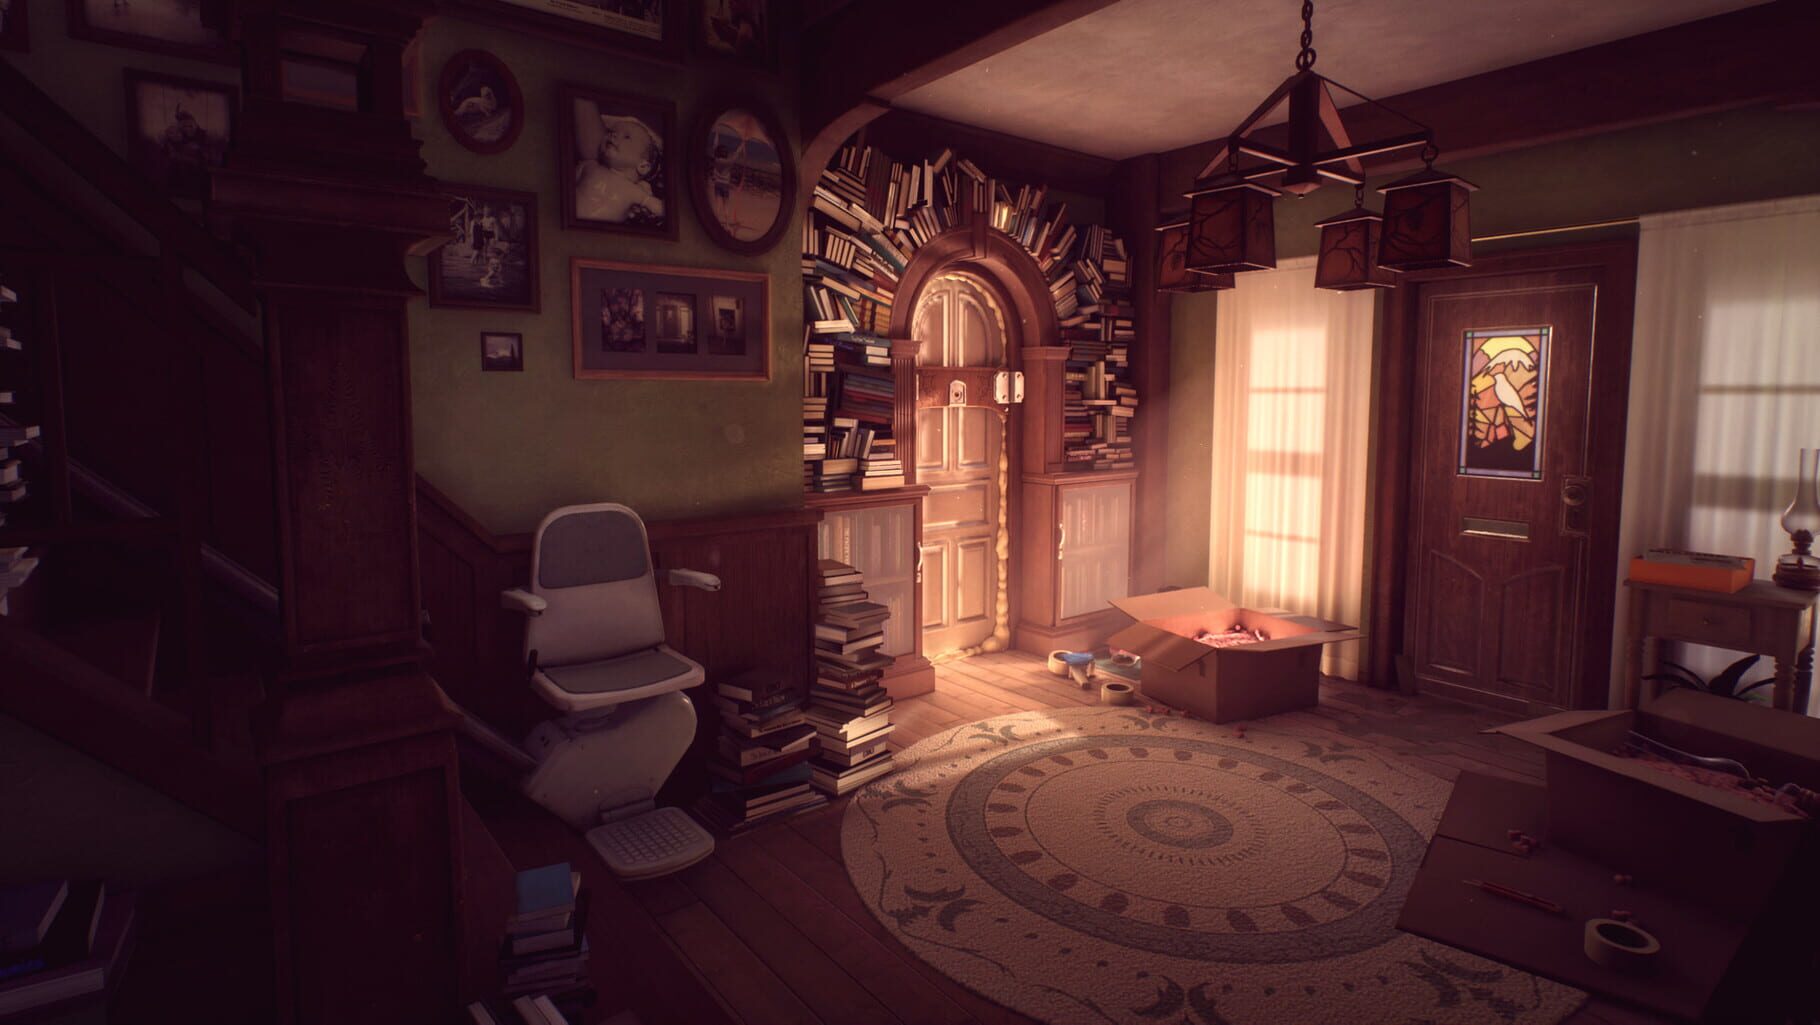 What Remains of Edith Finch Image